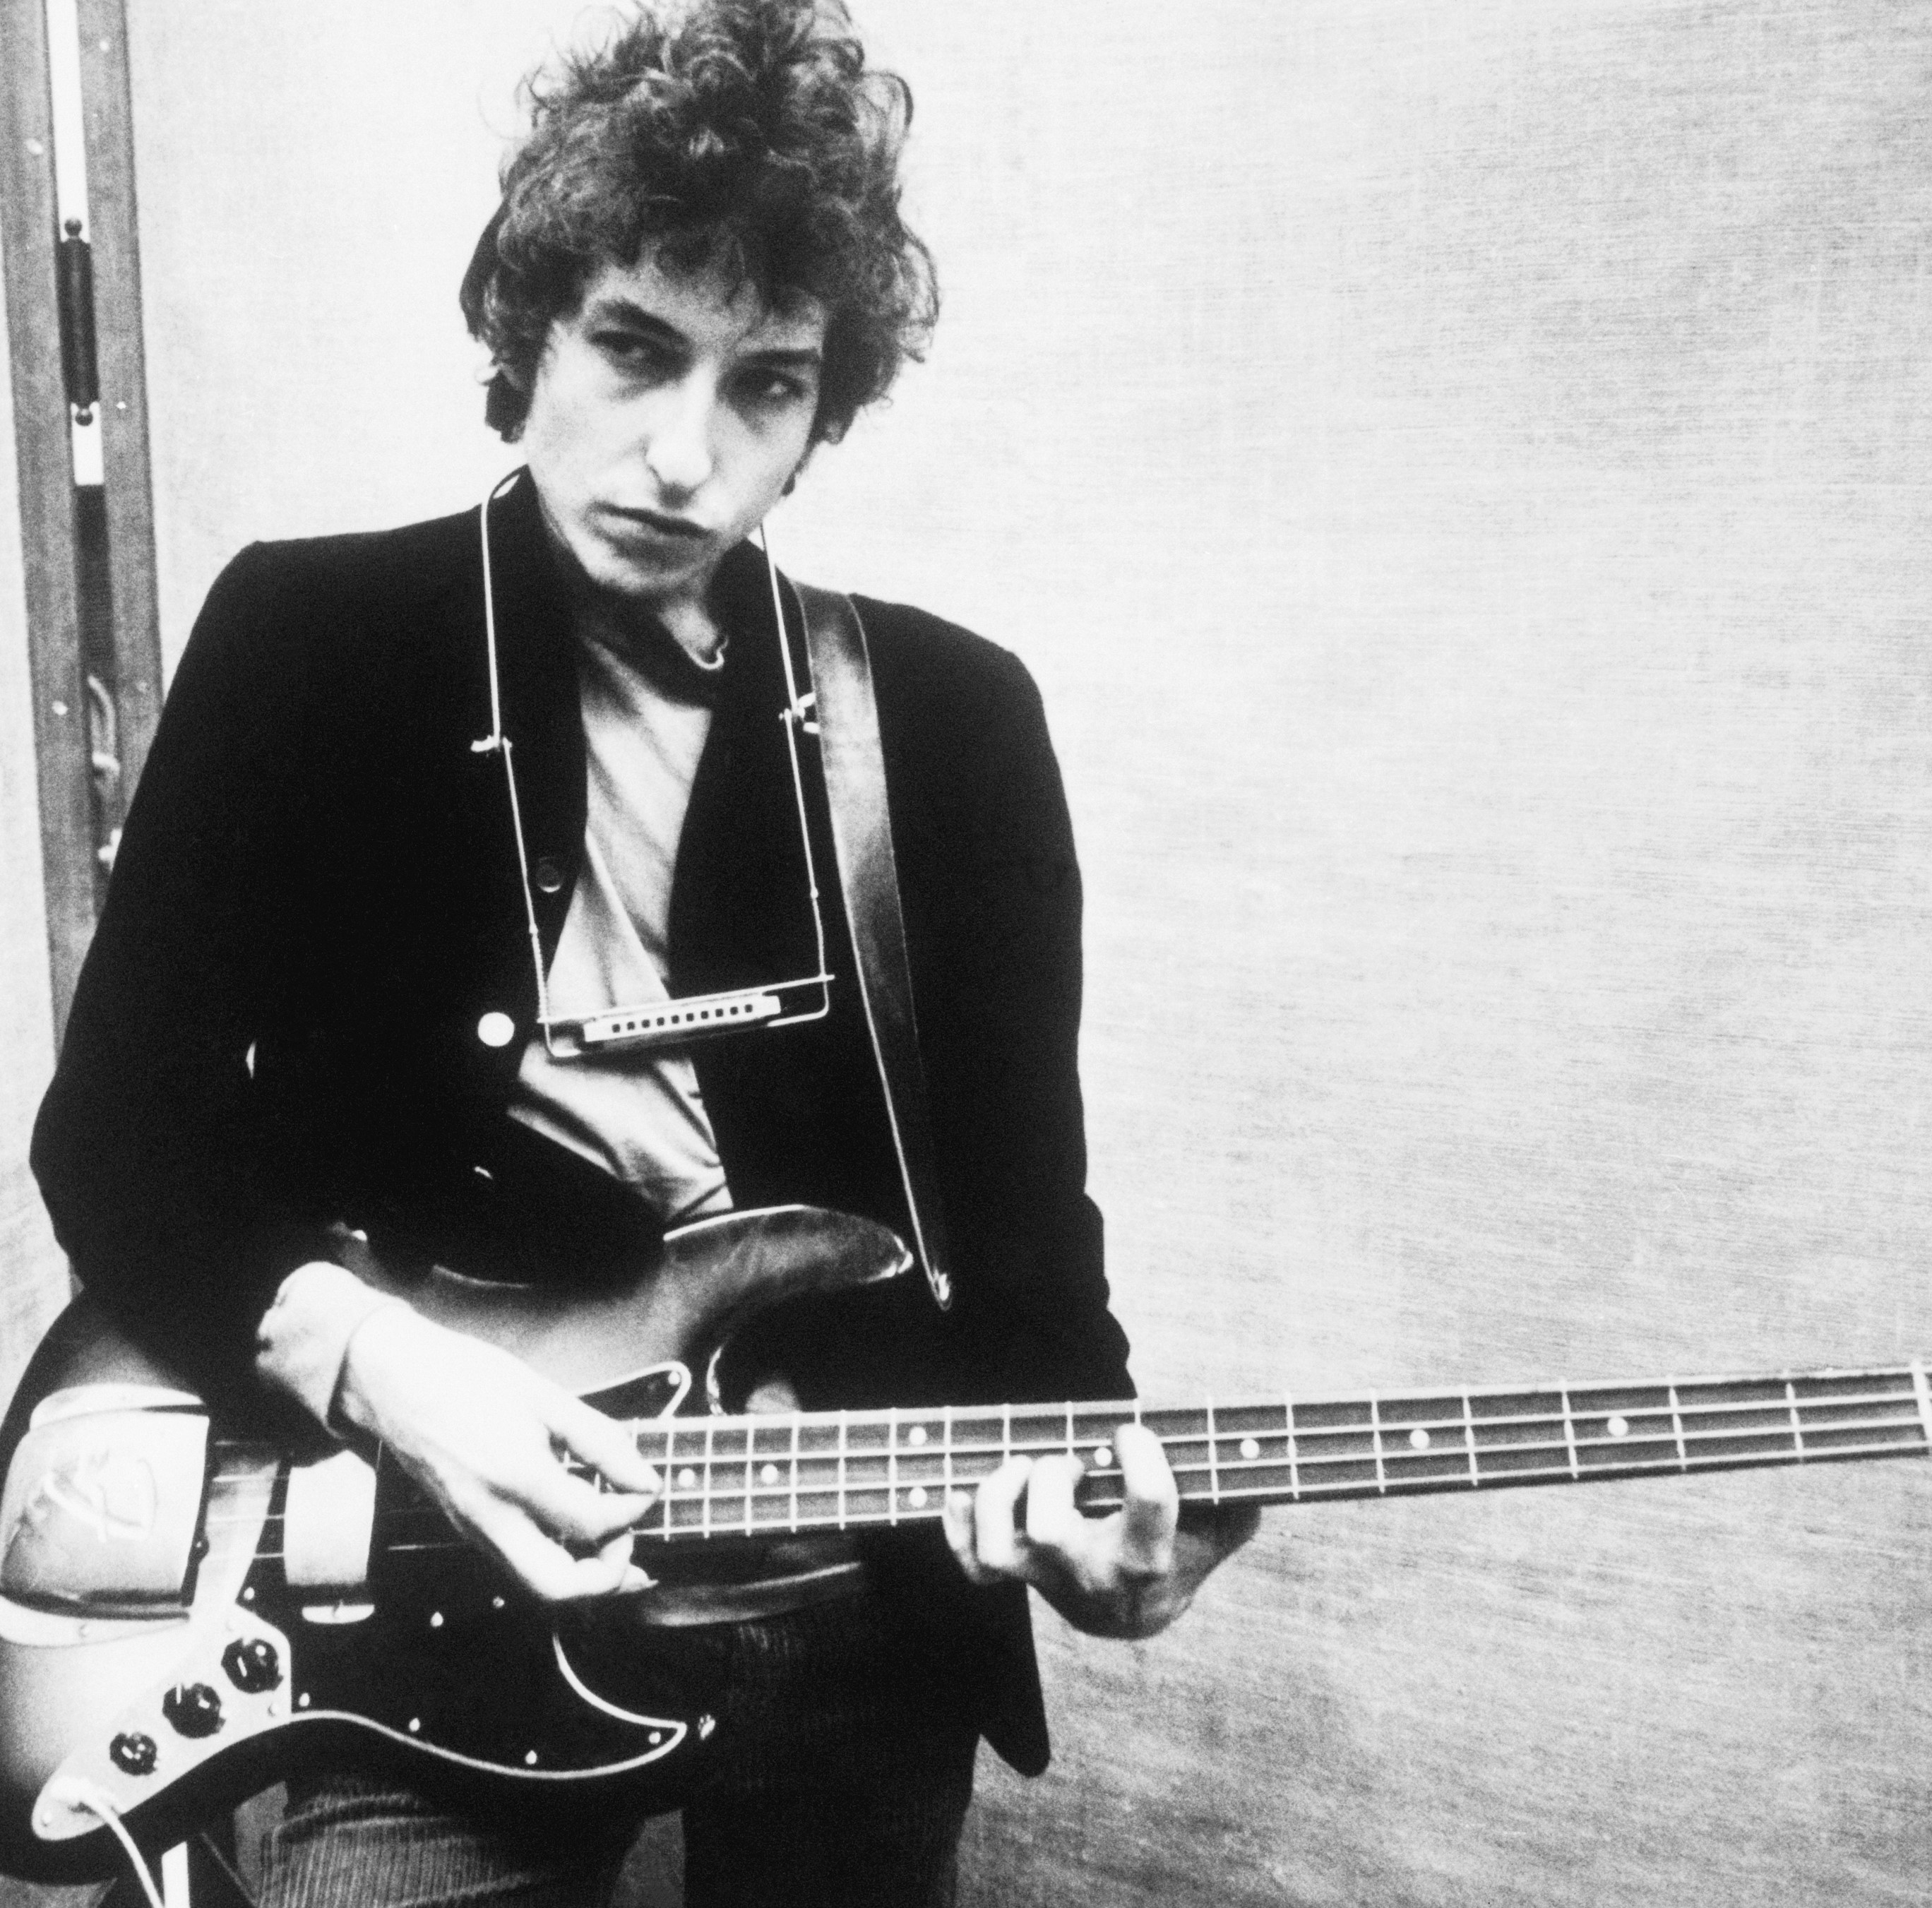 Why Don McLean Compared Bob Dylan’s ‘A Hard Rain’s a-Gonna Fall’ to The Beatles’ ‘A Day in the Life’